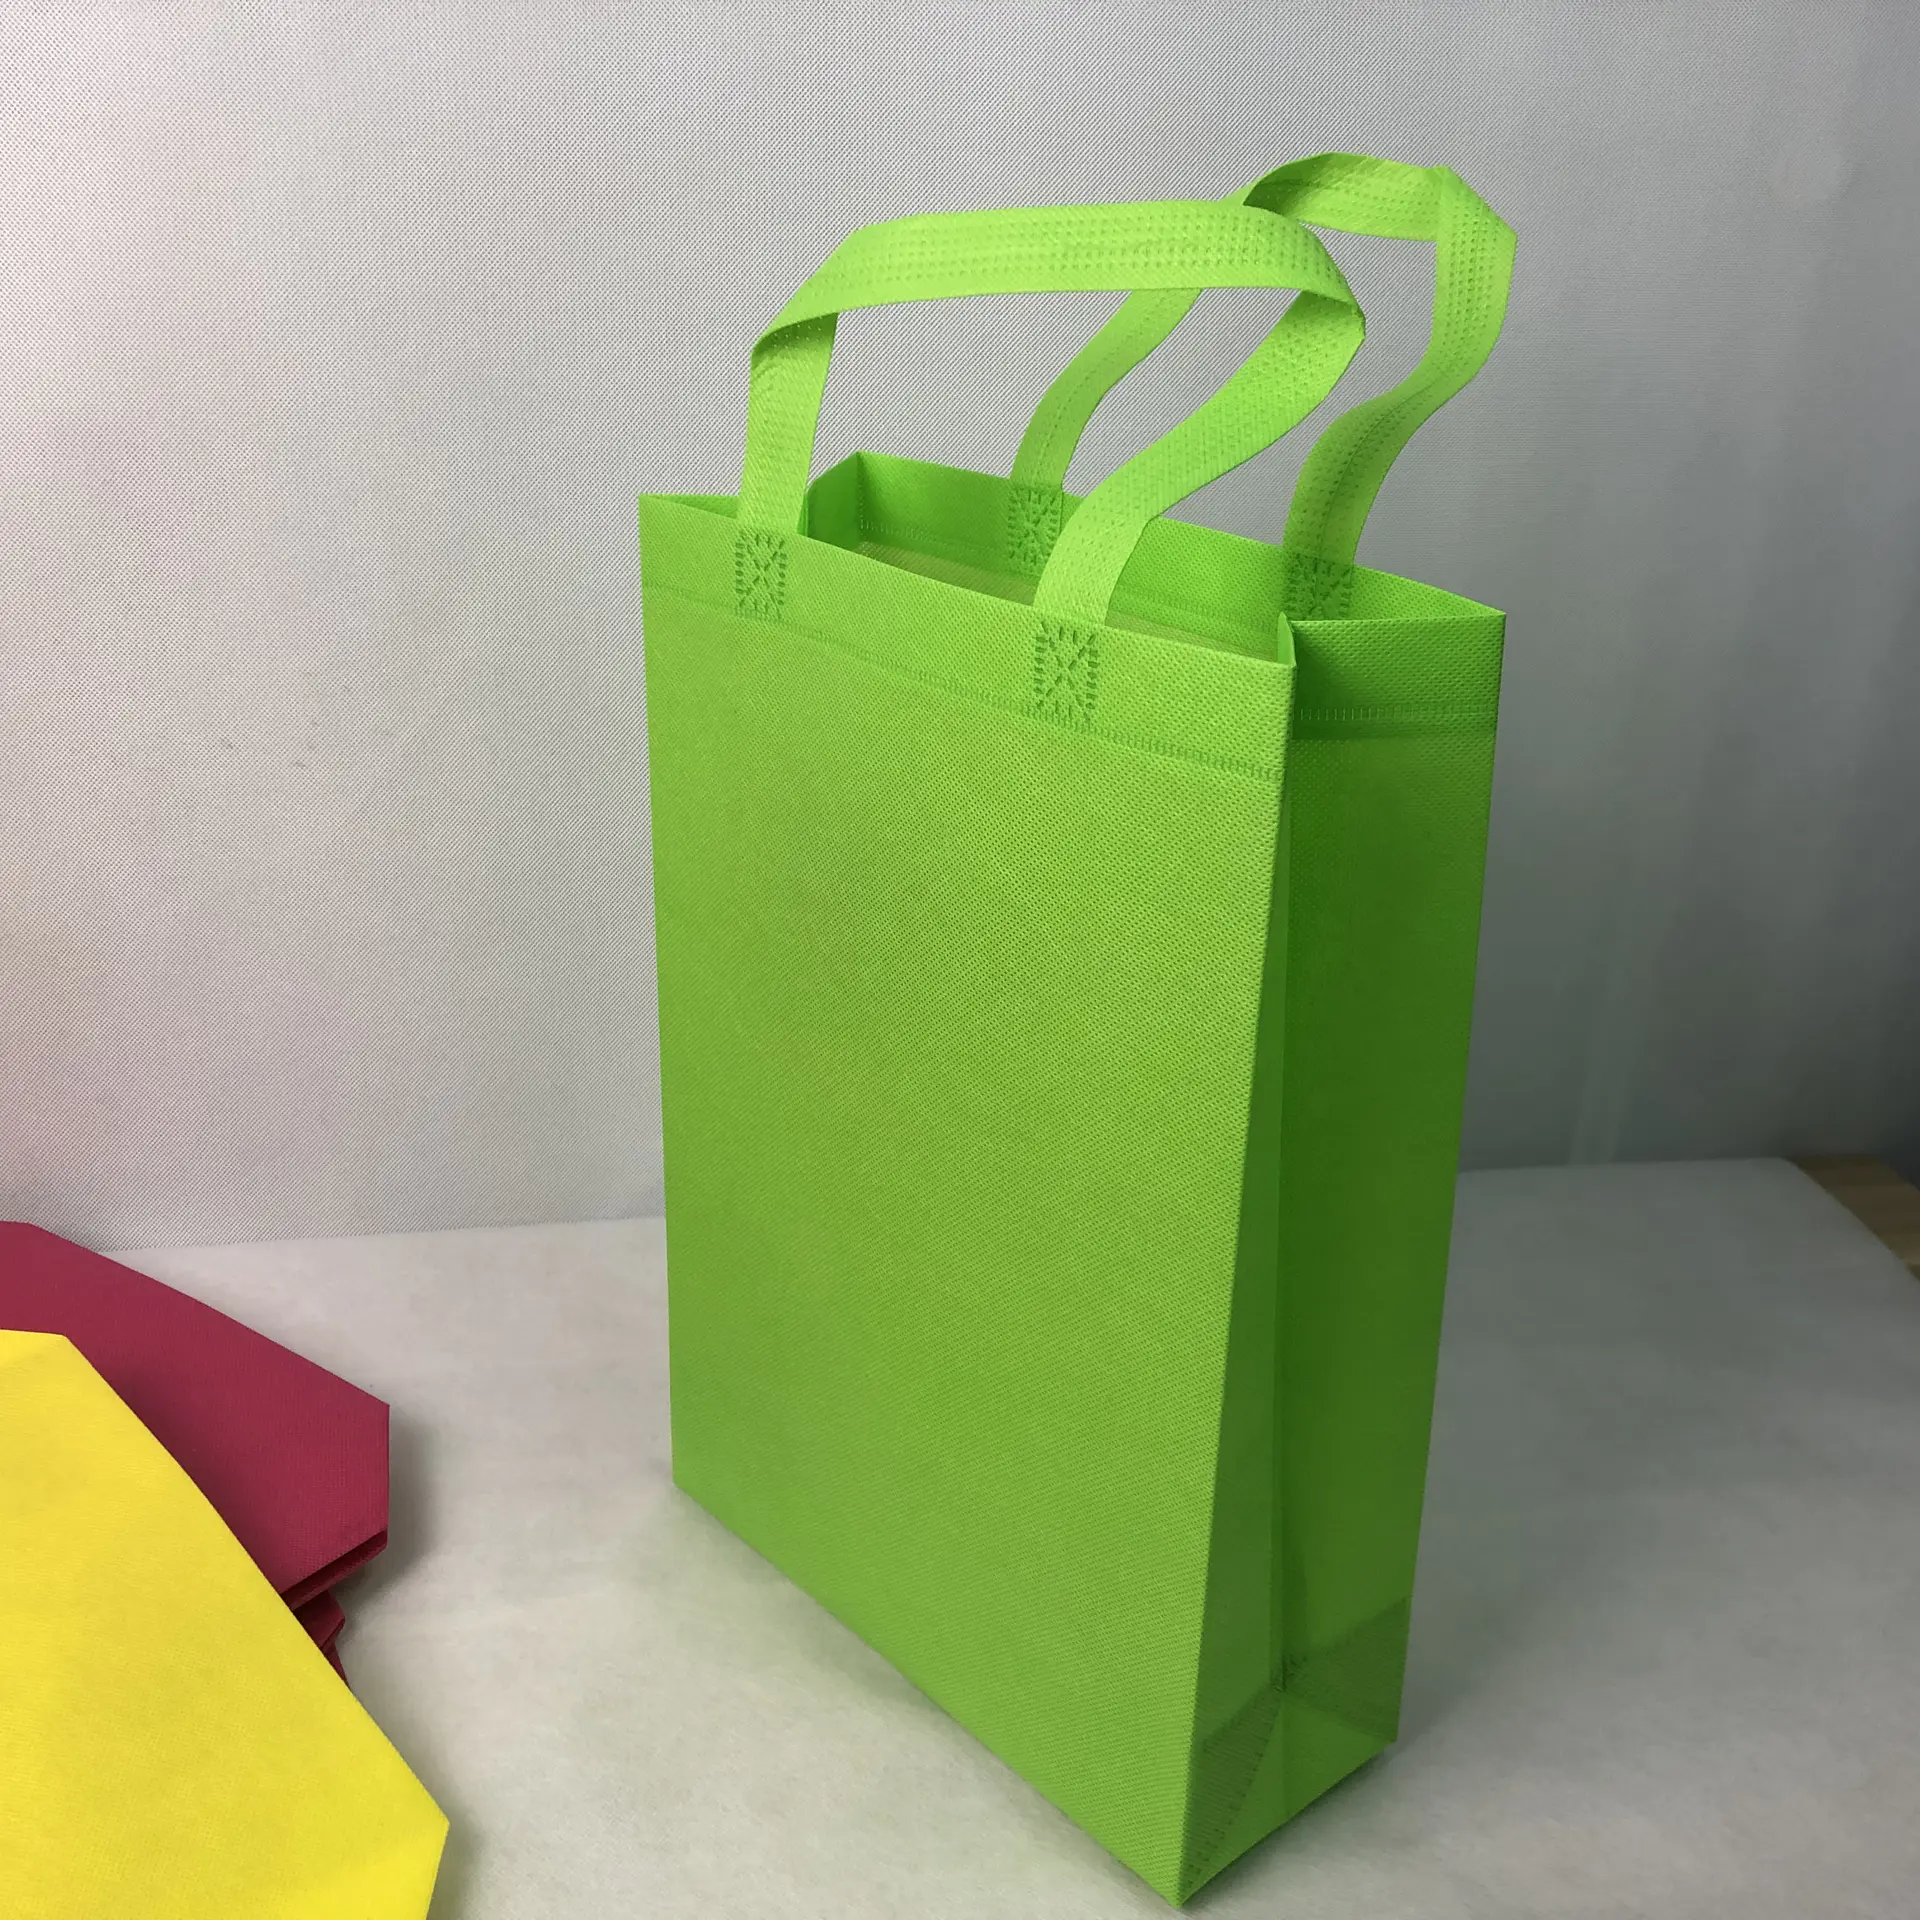 Factory low price direct sales can customize non-woven color handbag